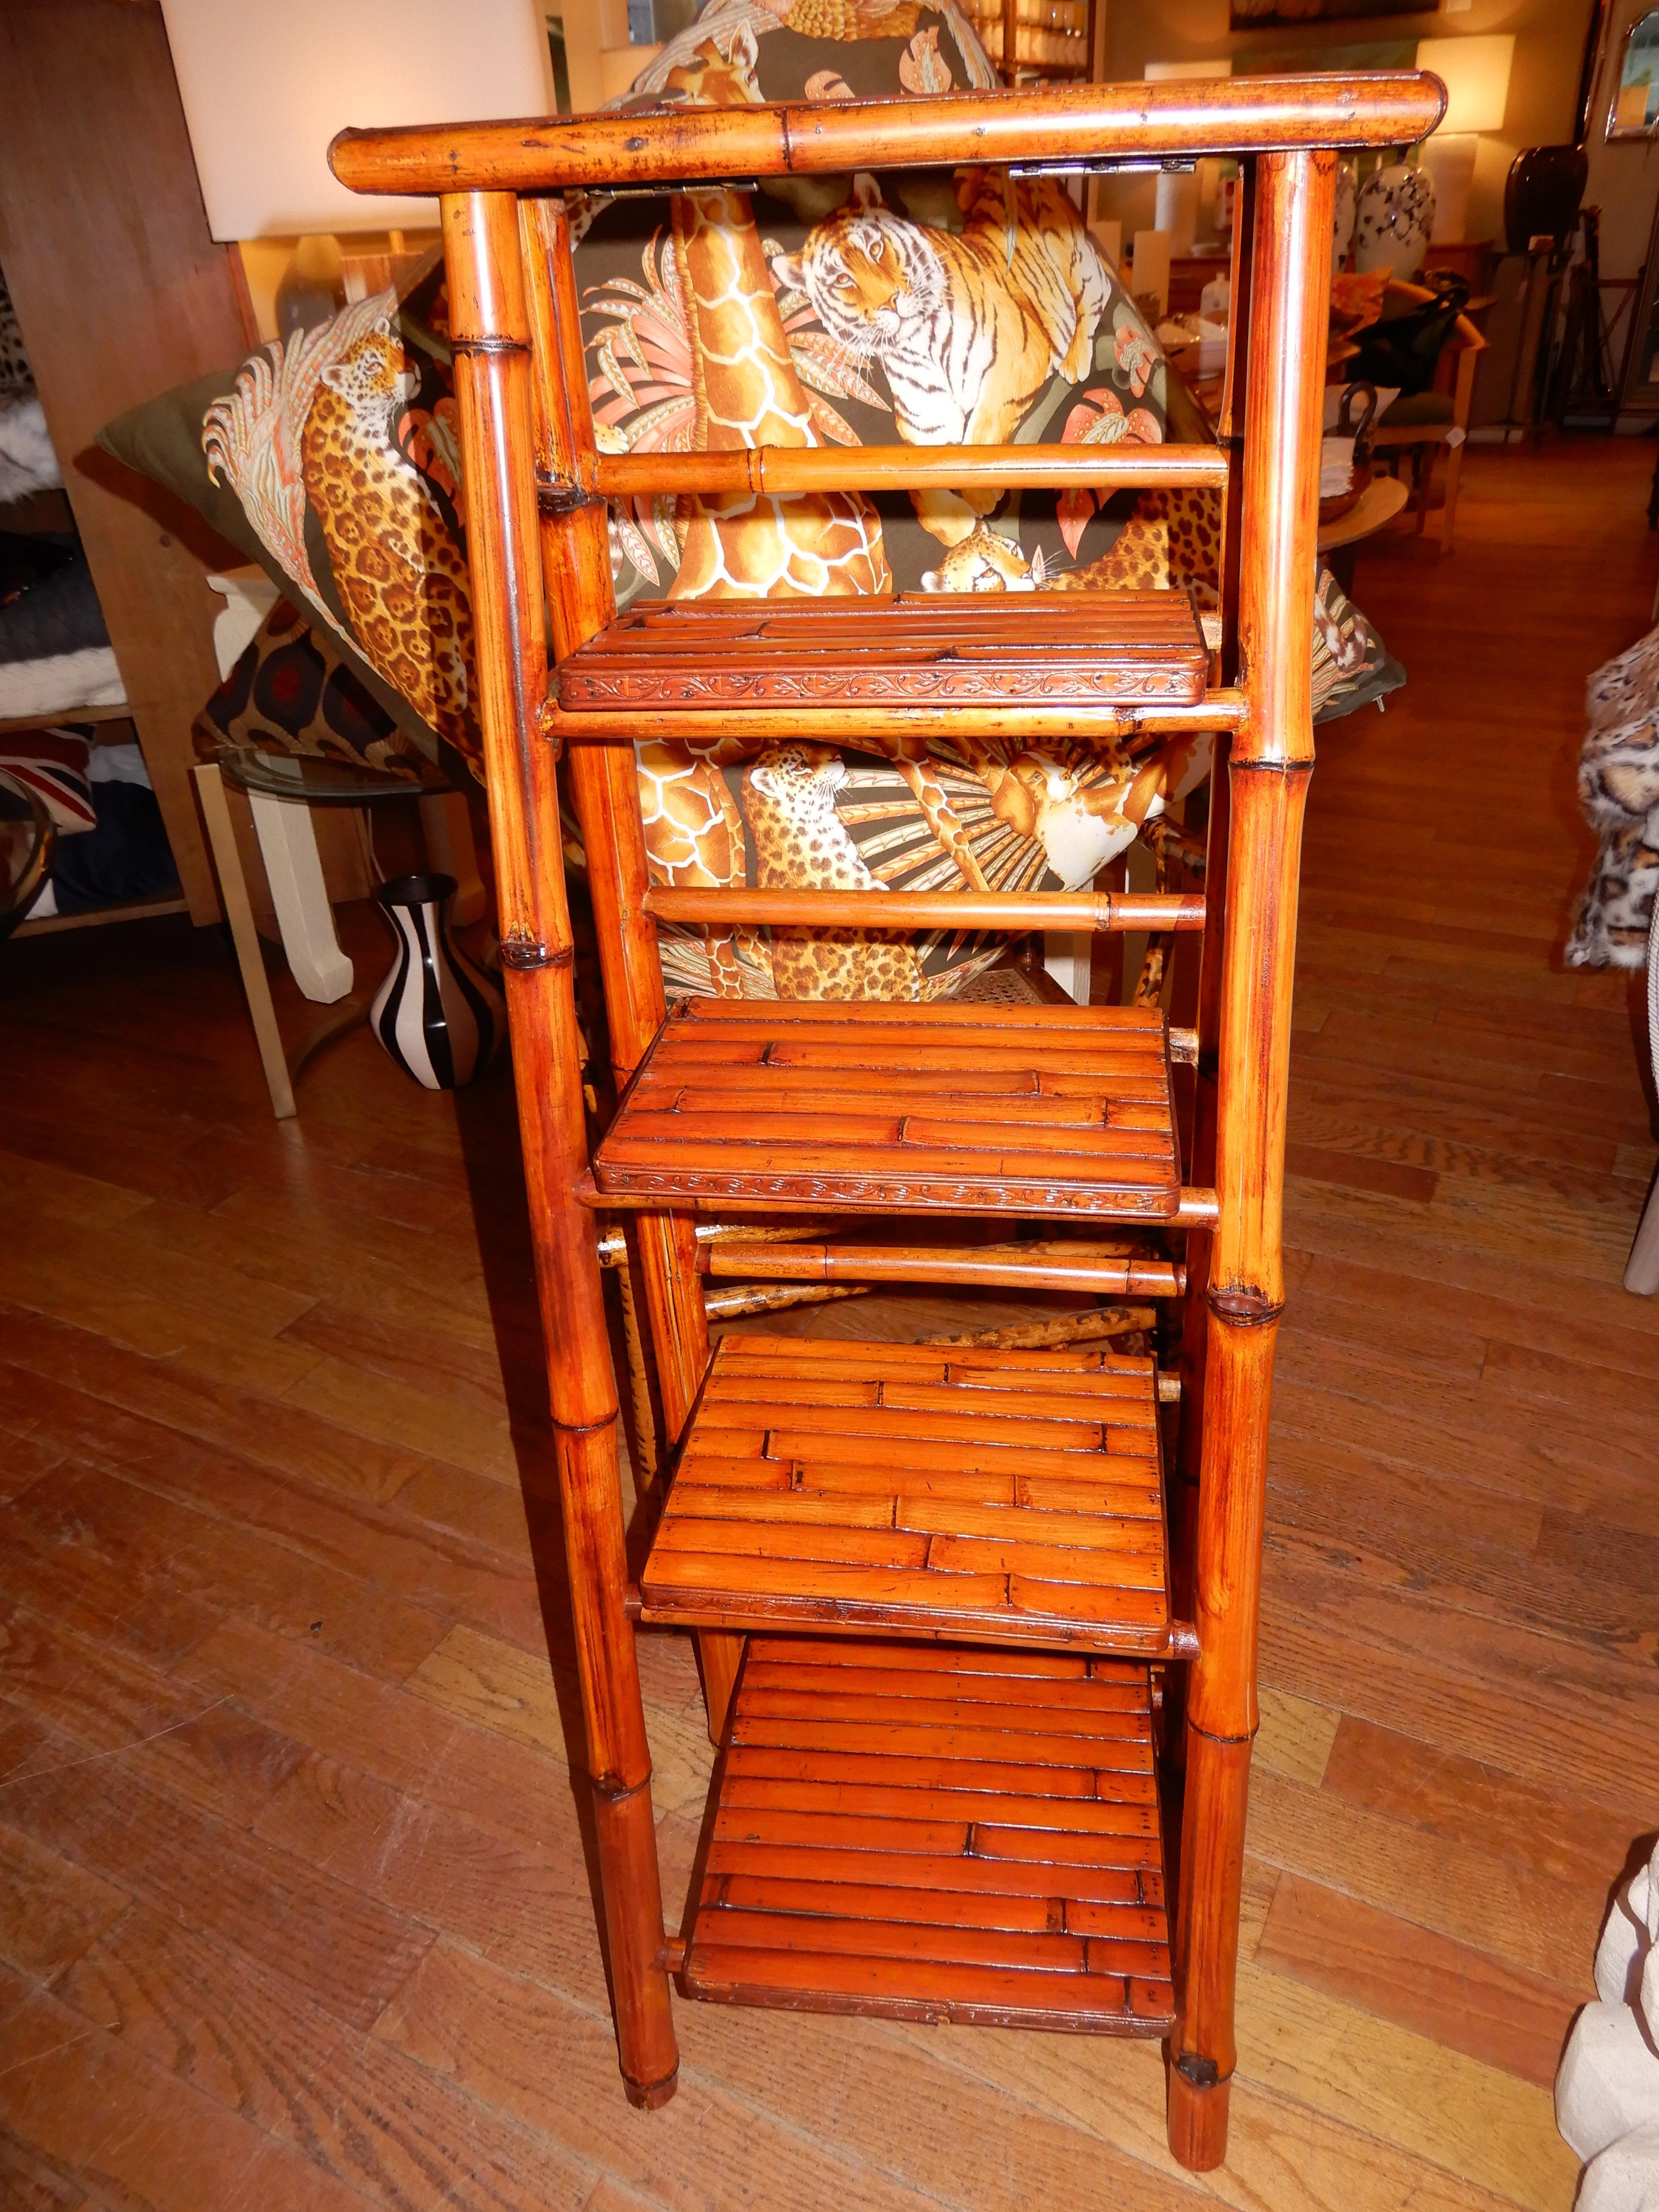 British Colonial artisan made free standing display stand or ladder, great bathroom piece or plant stand, not to be used as a climbing ladder.
Wonderful condition.
Natural organic bamboo furniture,artisan made.